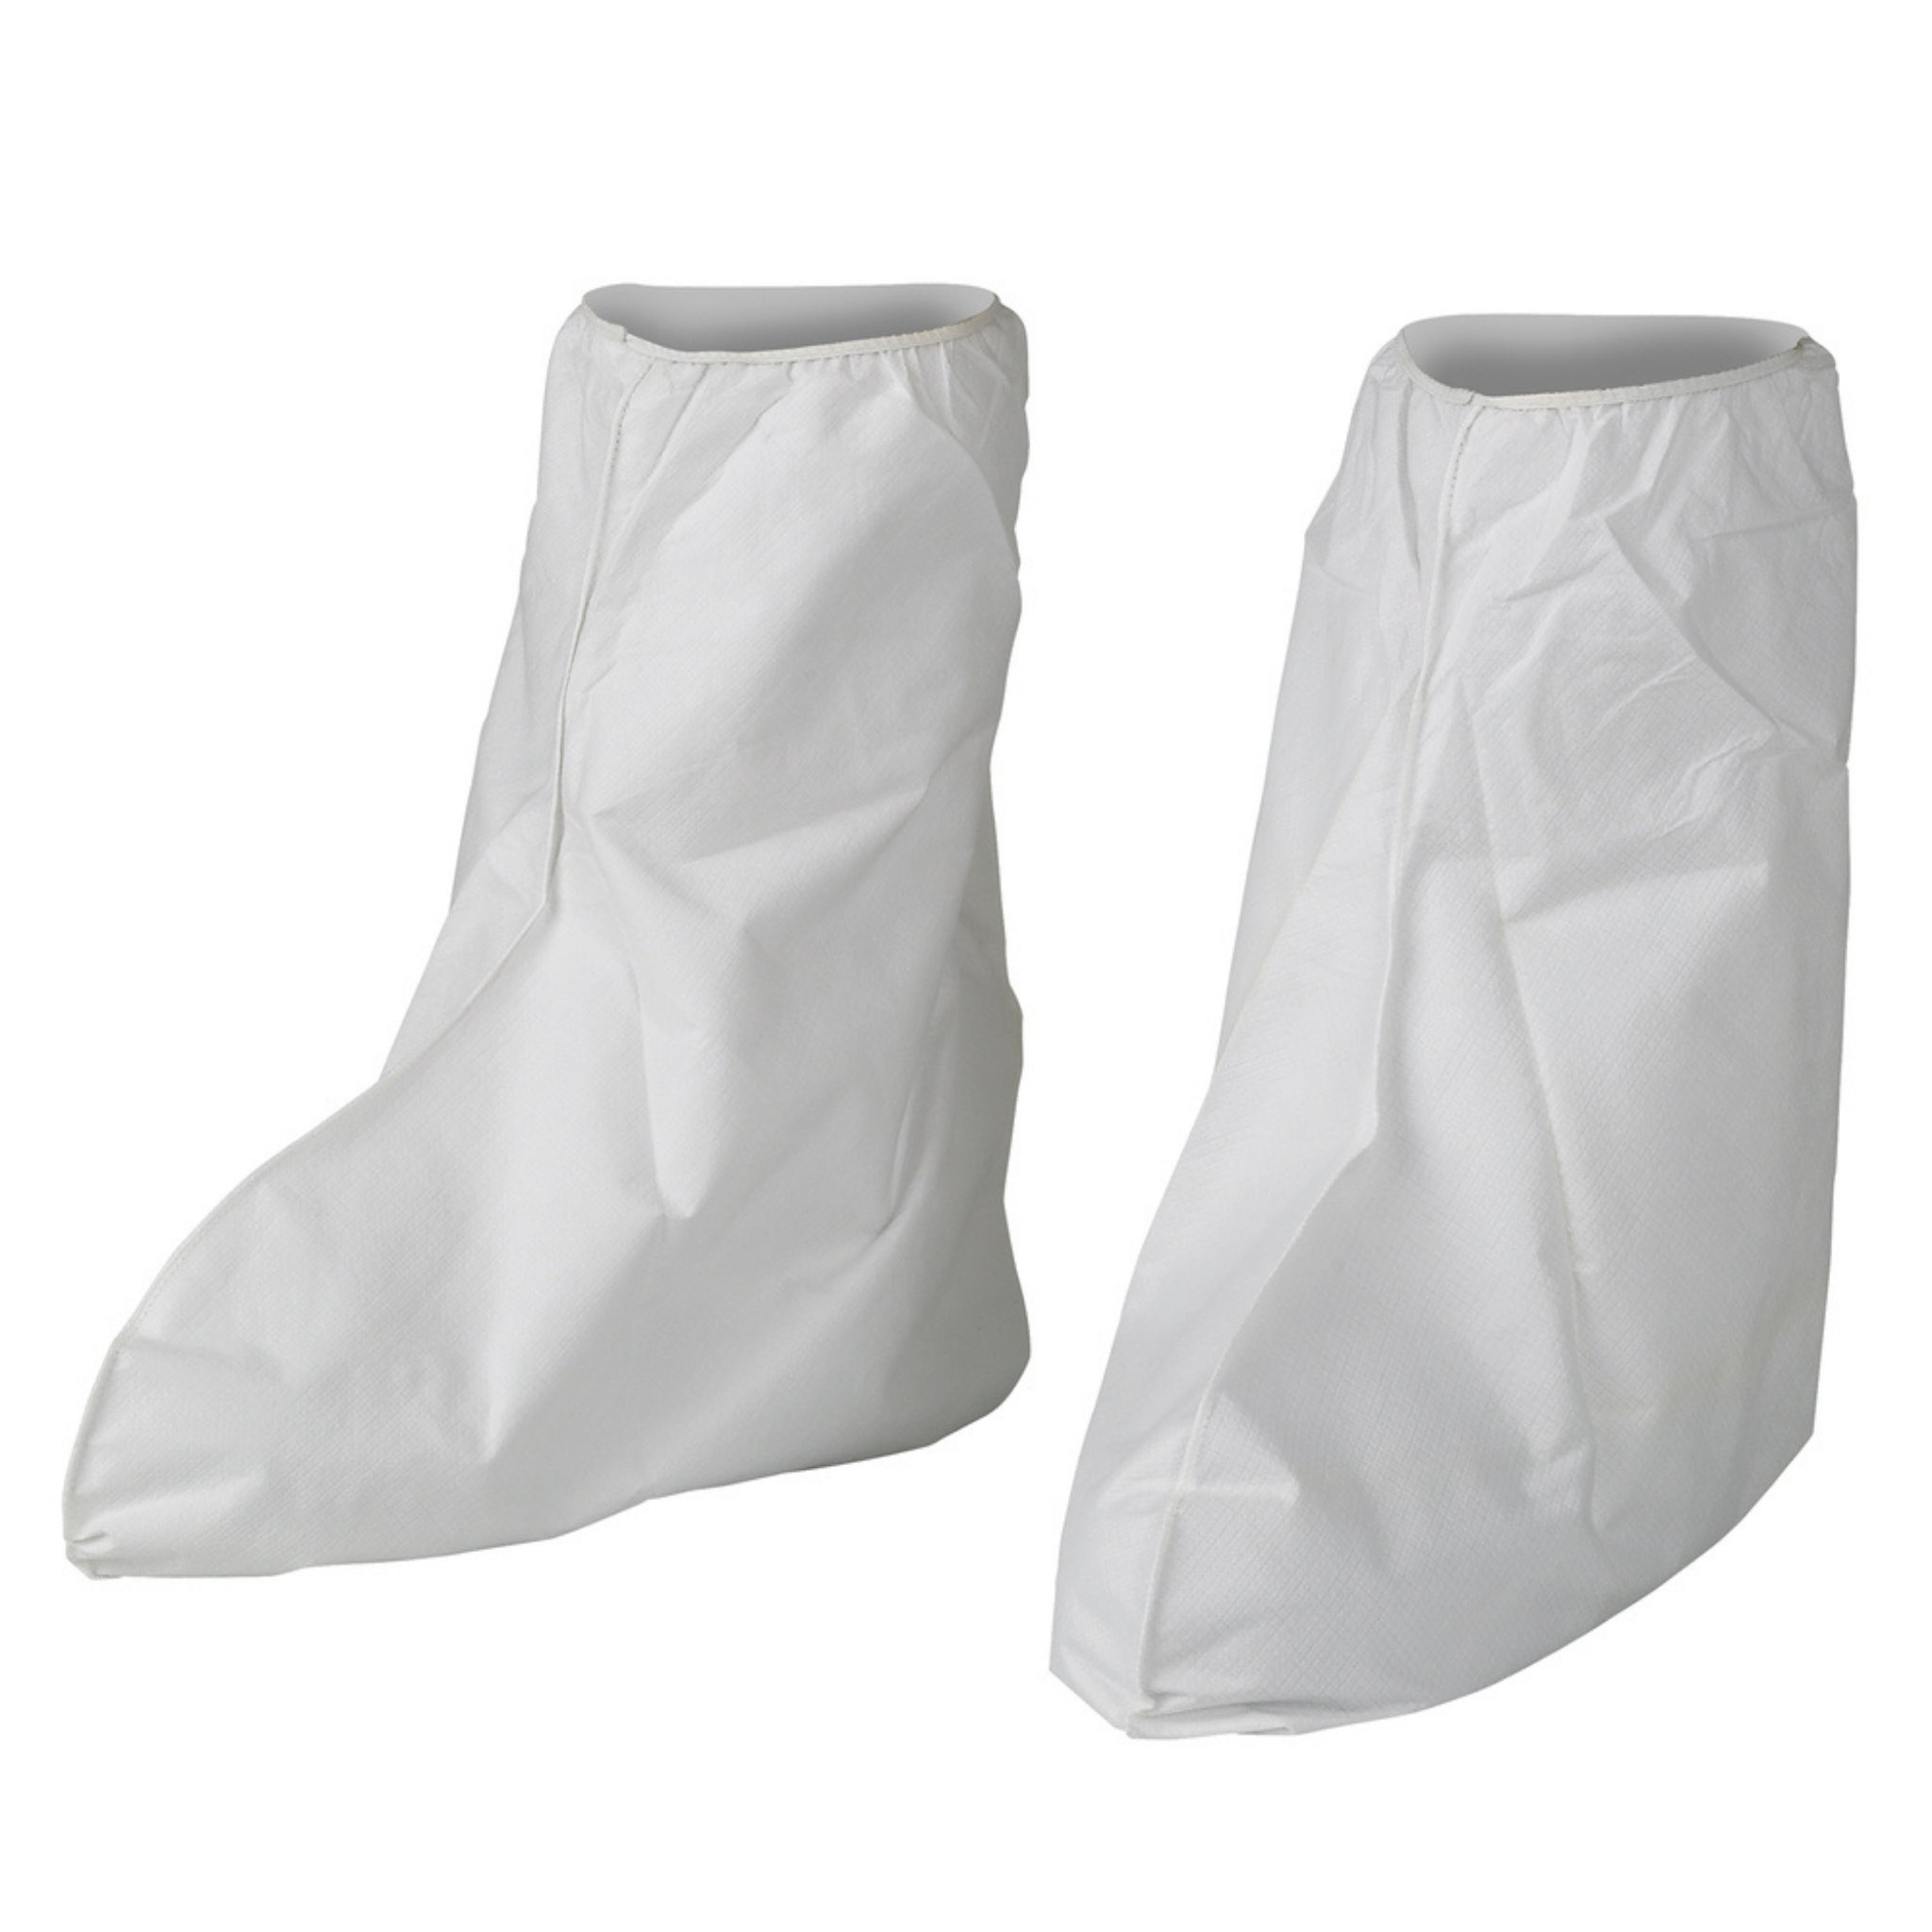 Kleenguard 44491- A40 Liquid & Particle Protection Boot Covers , 17” Tall, Elastic, White, Universal Size, 400 / Case